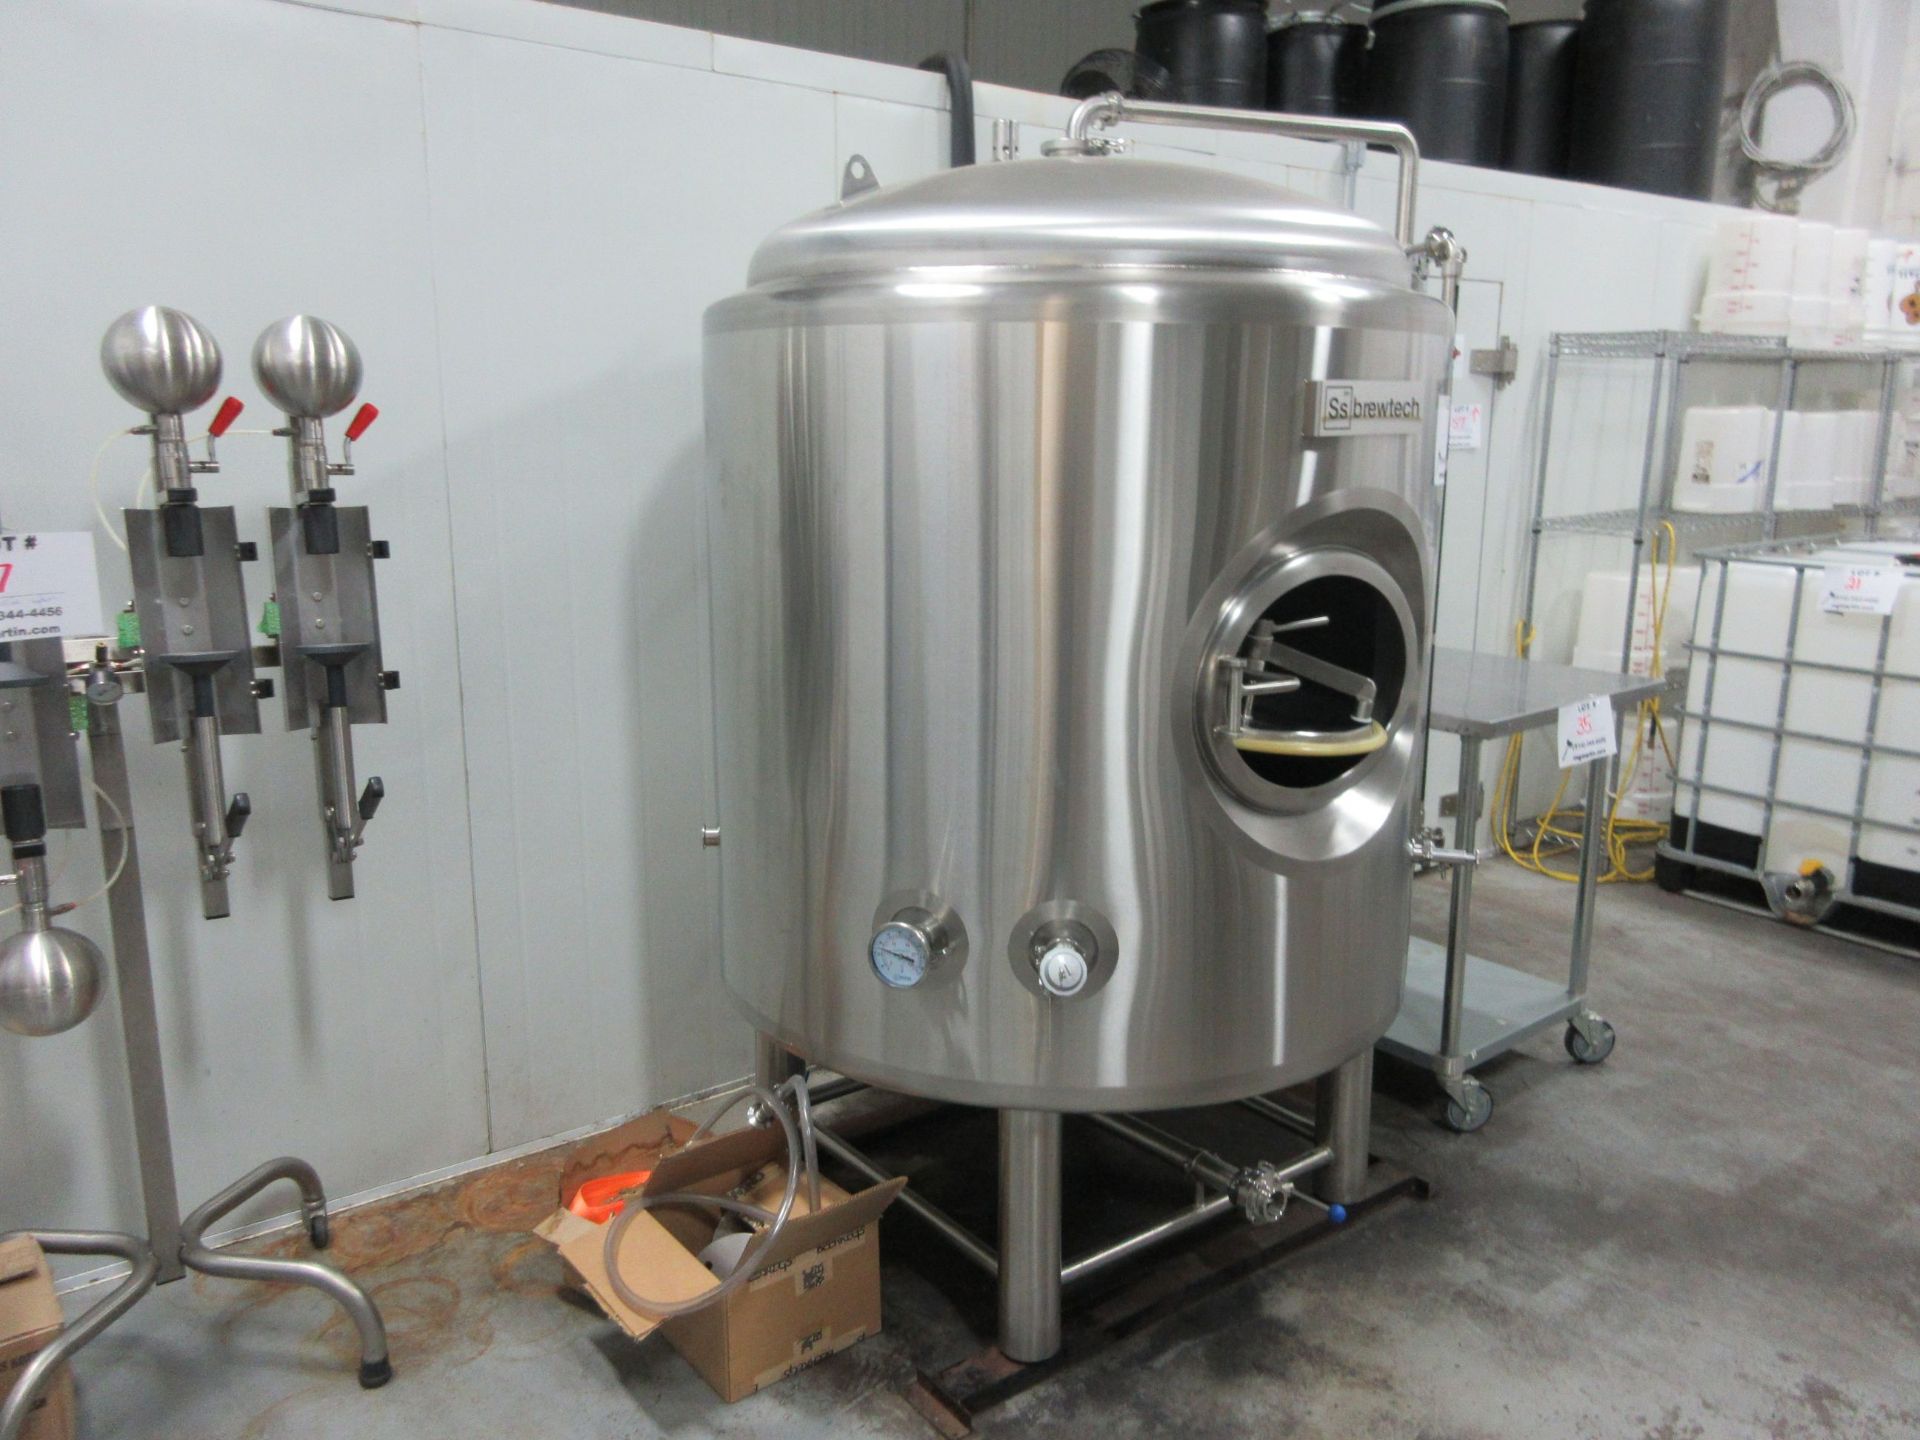 BREW TECH stainless steel tank (jacketed)1500 litres c/w electric glycol chiller model EXTRA 3/4 - Image 2 of 12